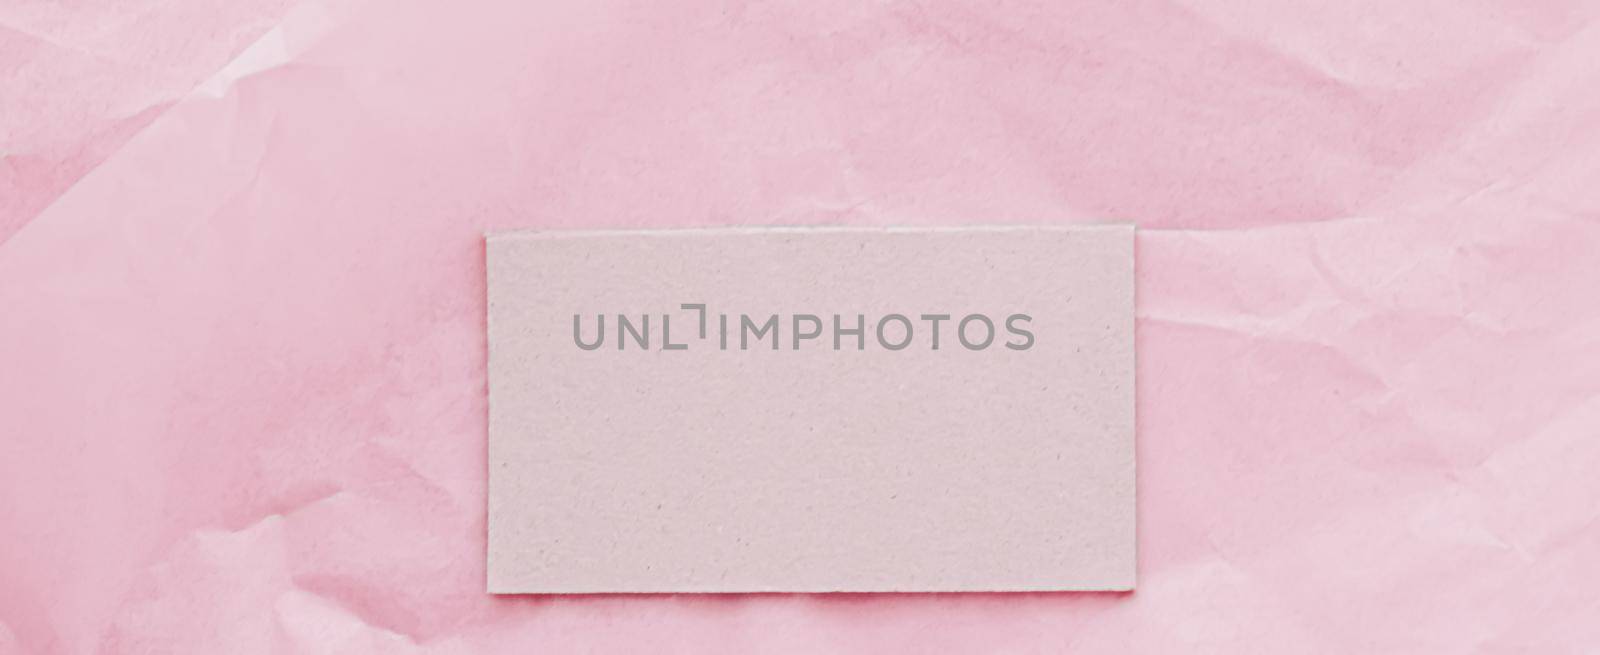 Business card flatlay on pink tissue paper background, luxury branding flat lay and brand identity design for mockups